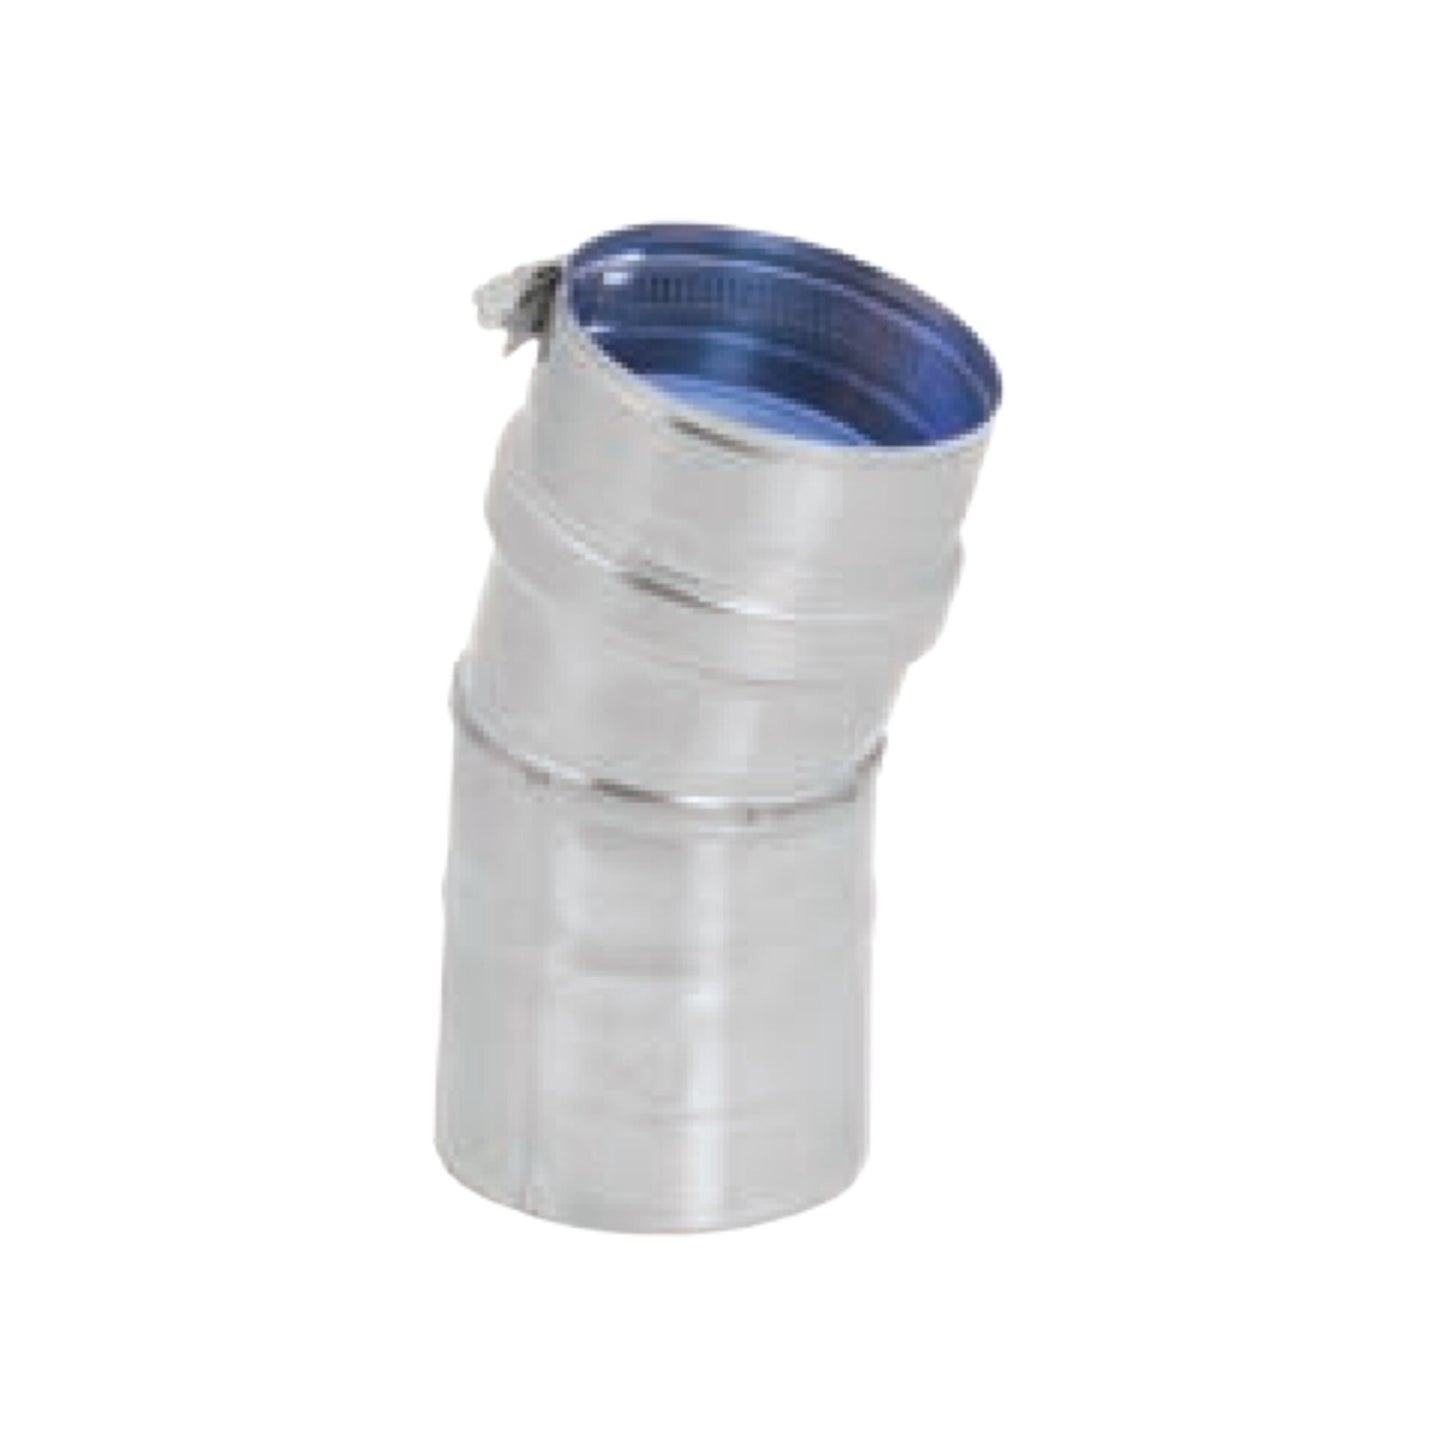 DuraVent FasNSeal 4" 15 Degree 316L Stainless Steel Elbow